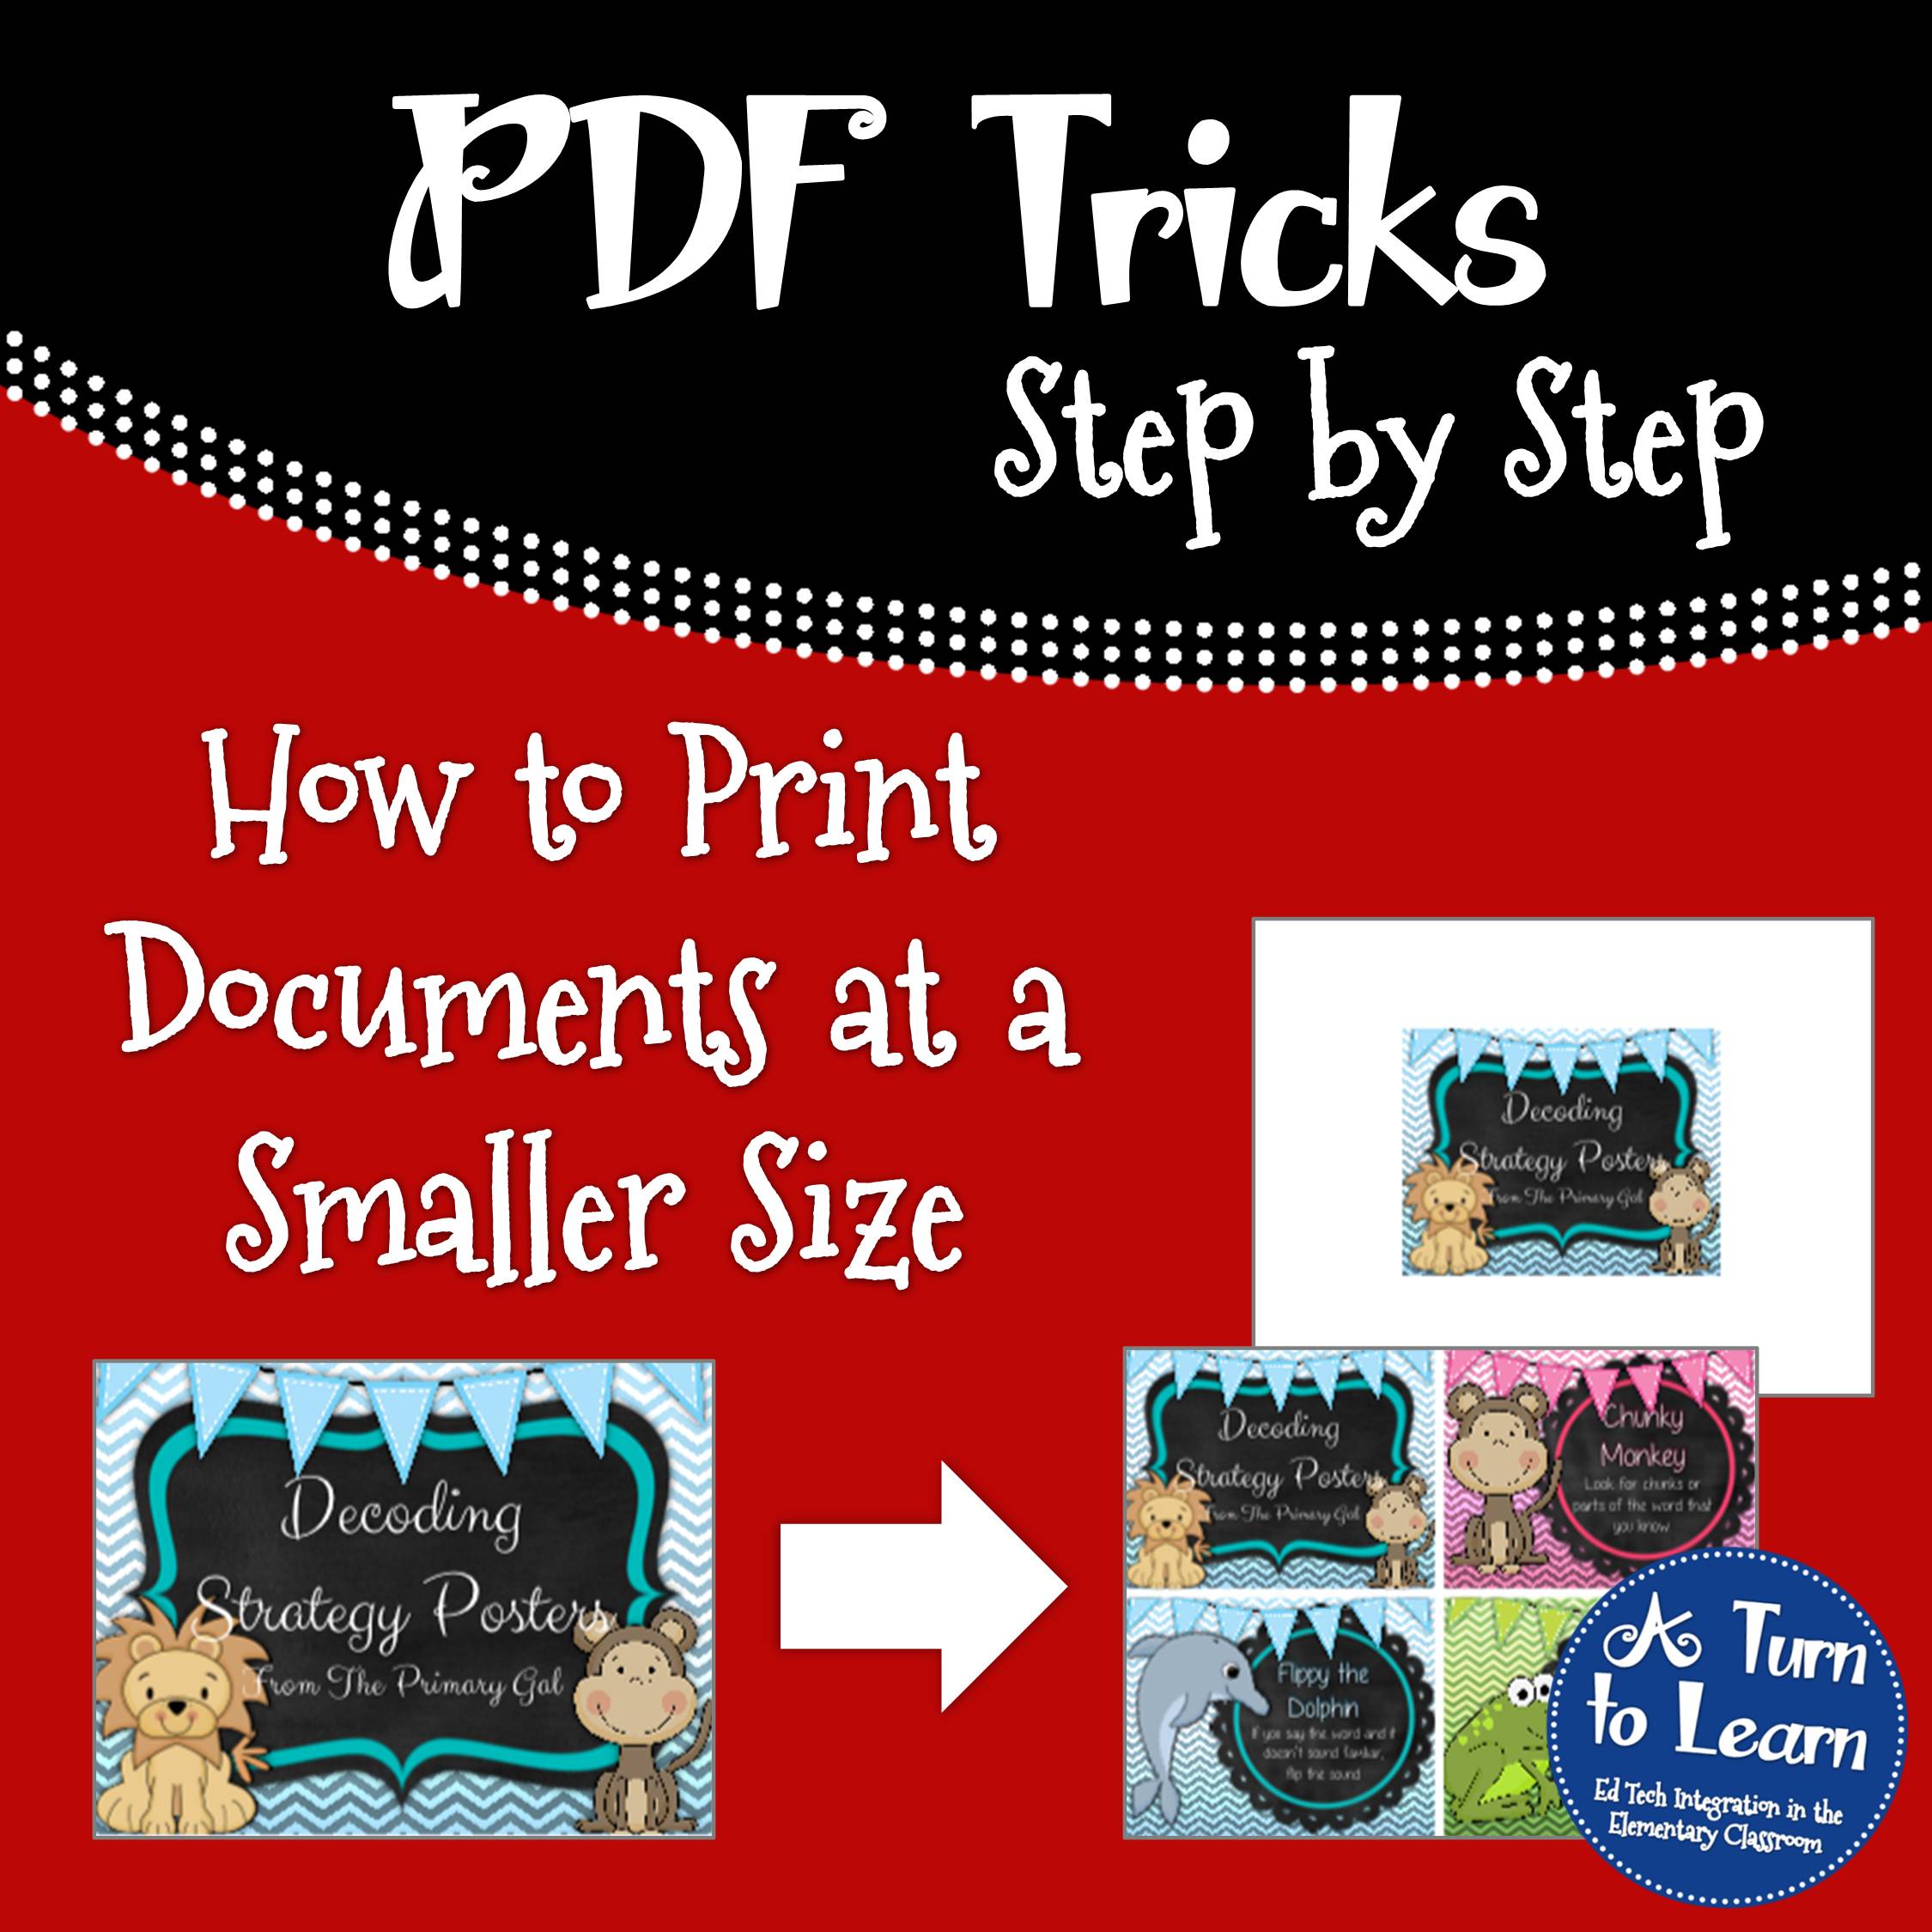 How to Print Documents at a Smaller Size